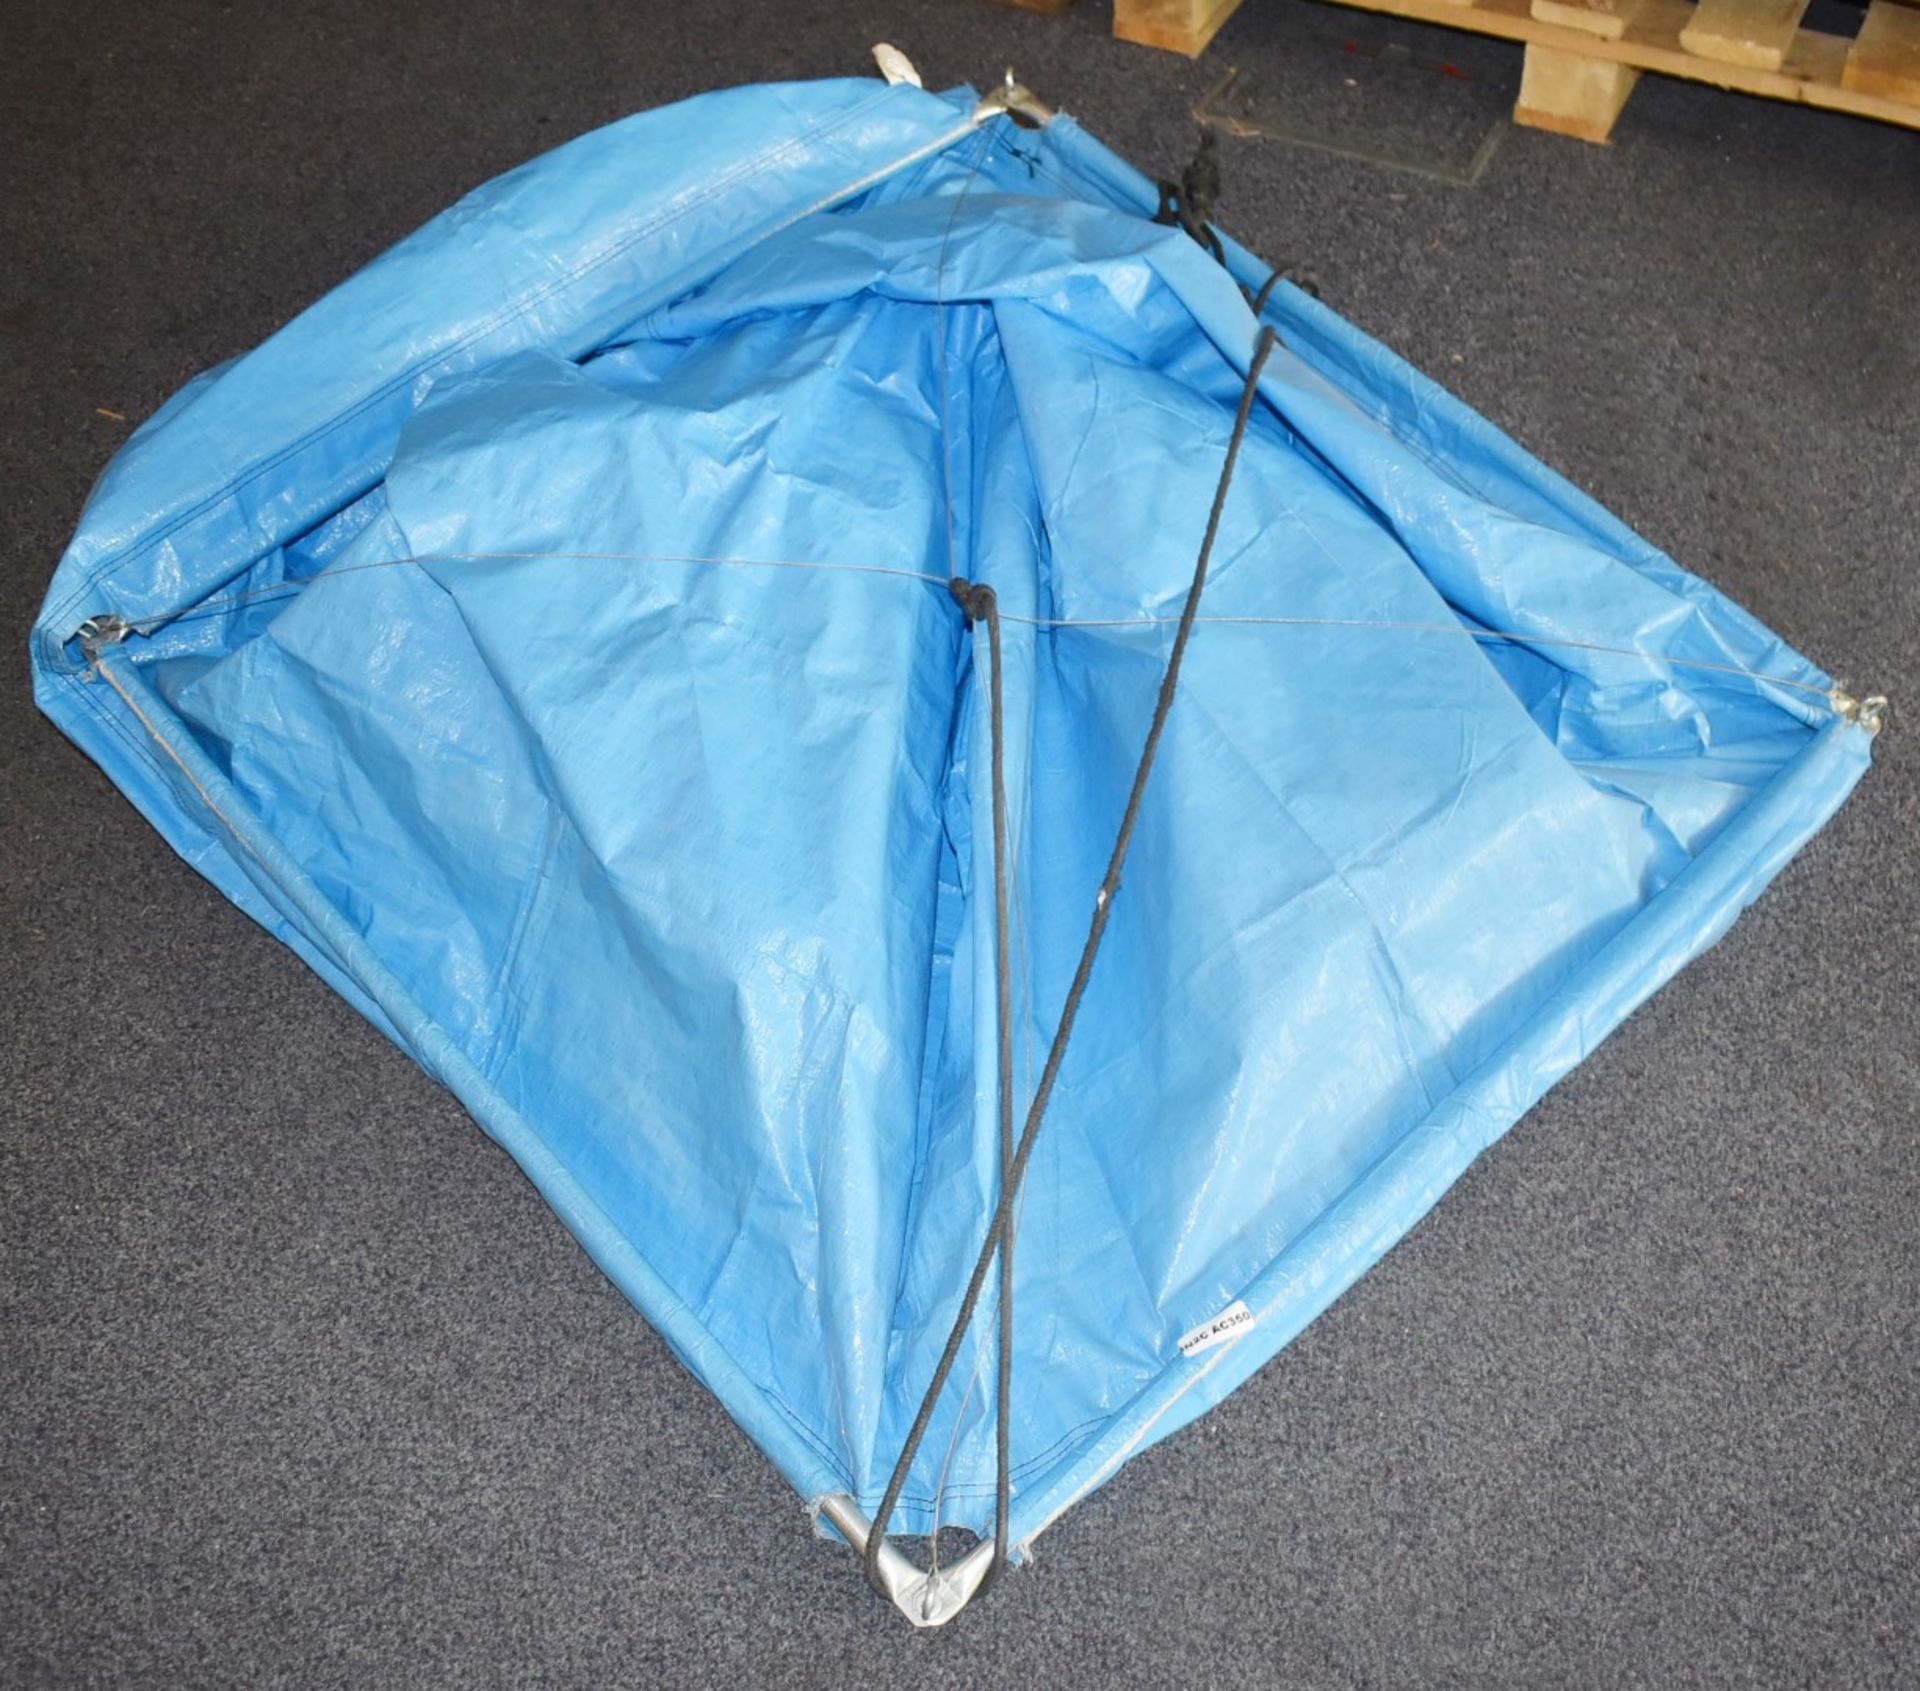 1 x Builders Waste Chute - Size: 100 x 100 cms – Ref: AC350 1FSR - CL646 - Location: Manchester, M12